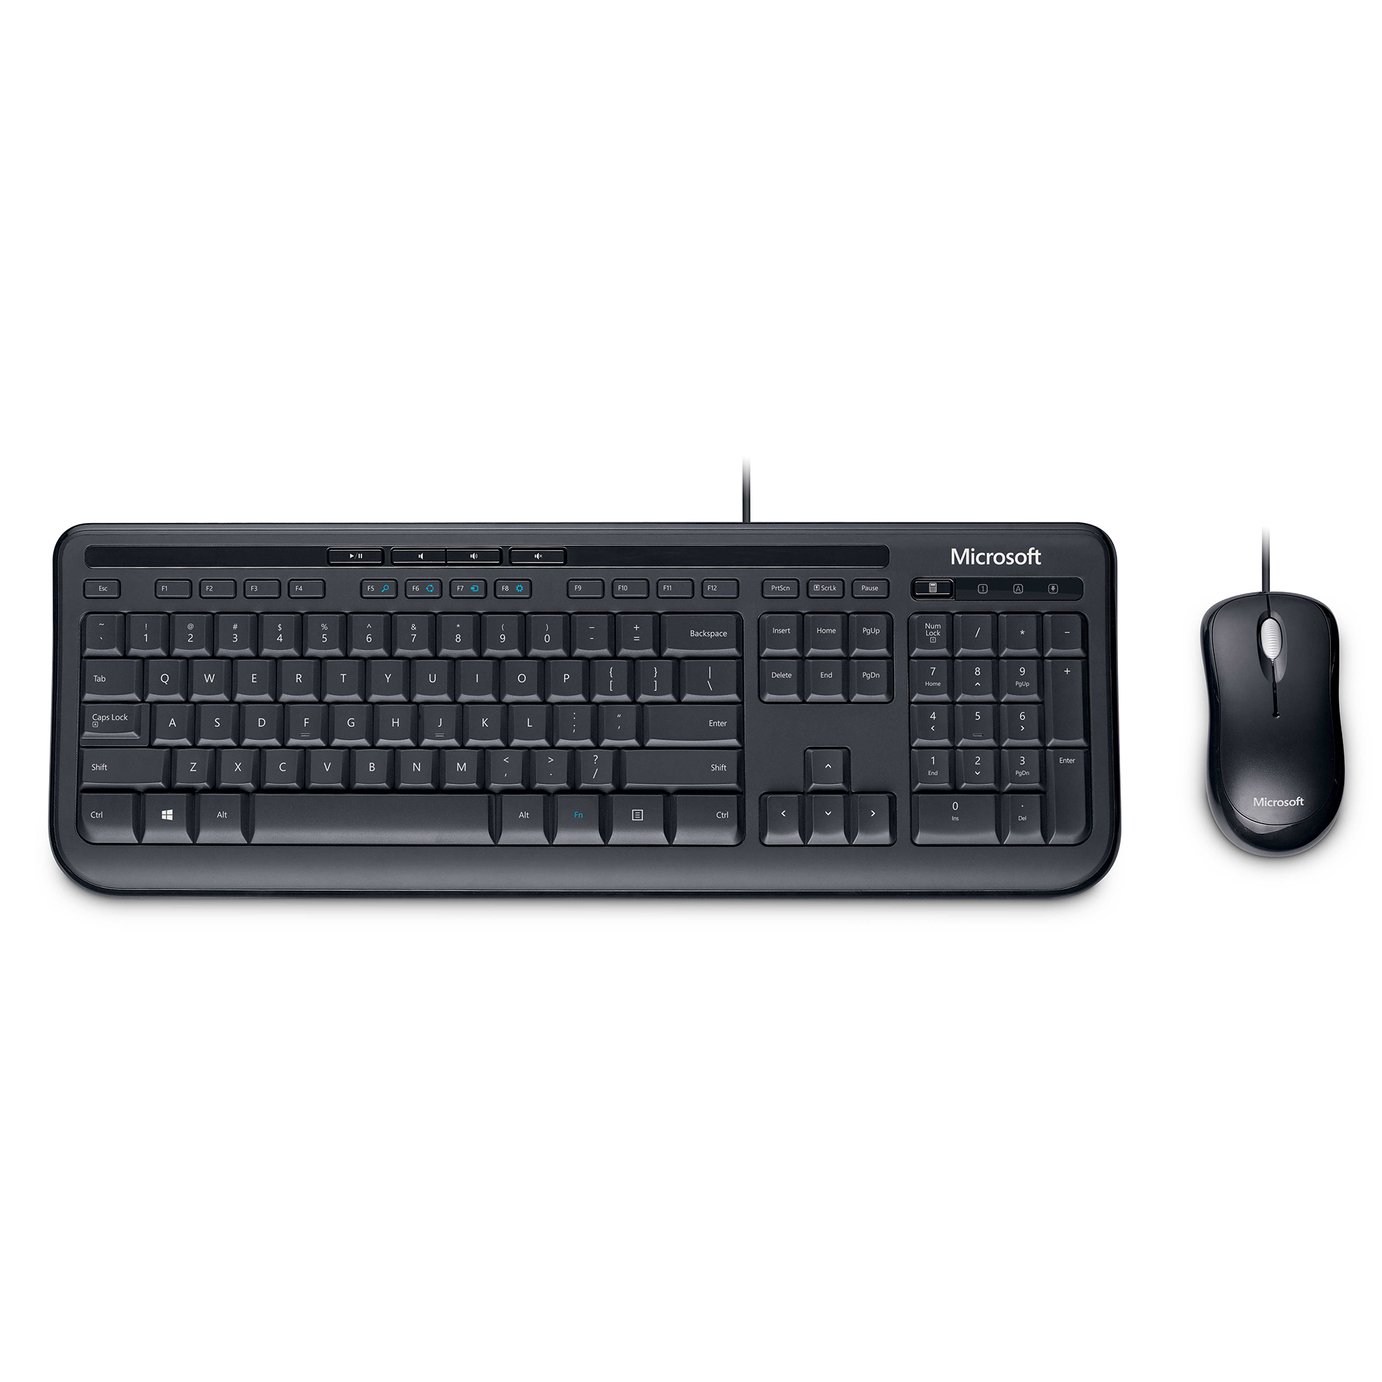 Microsoft APB-00006 Wired Mouse and Keyboard